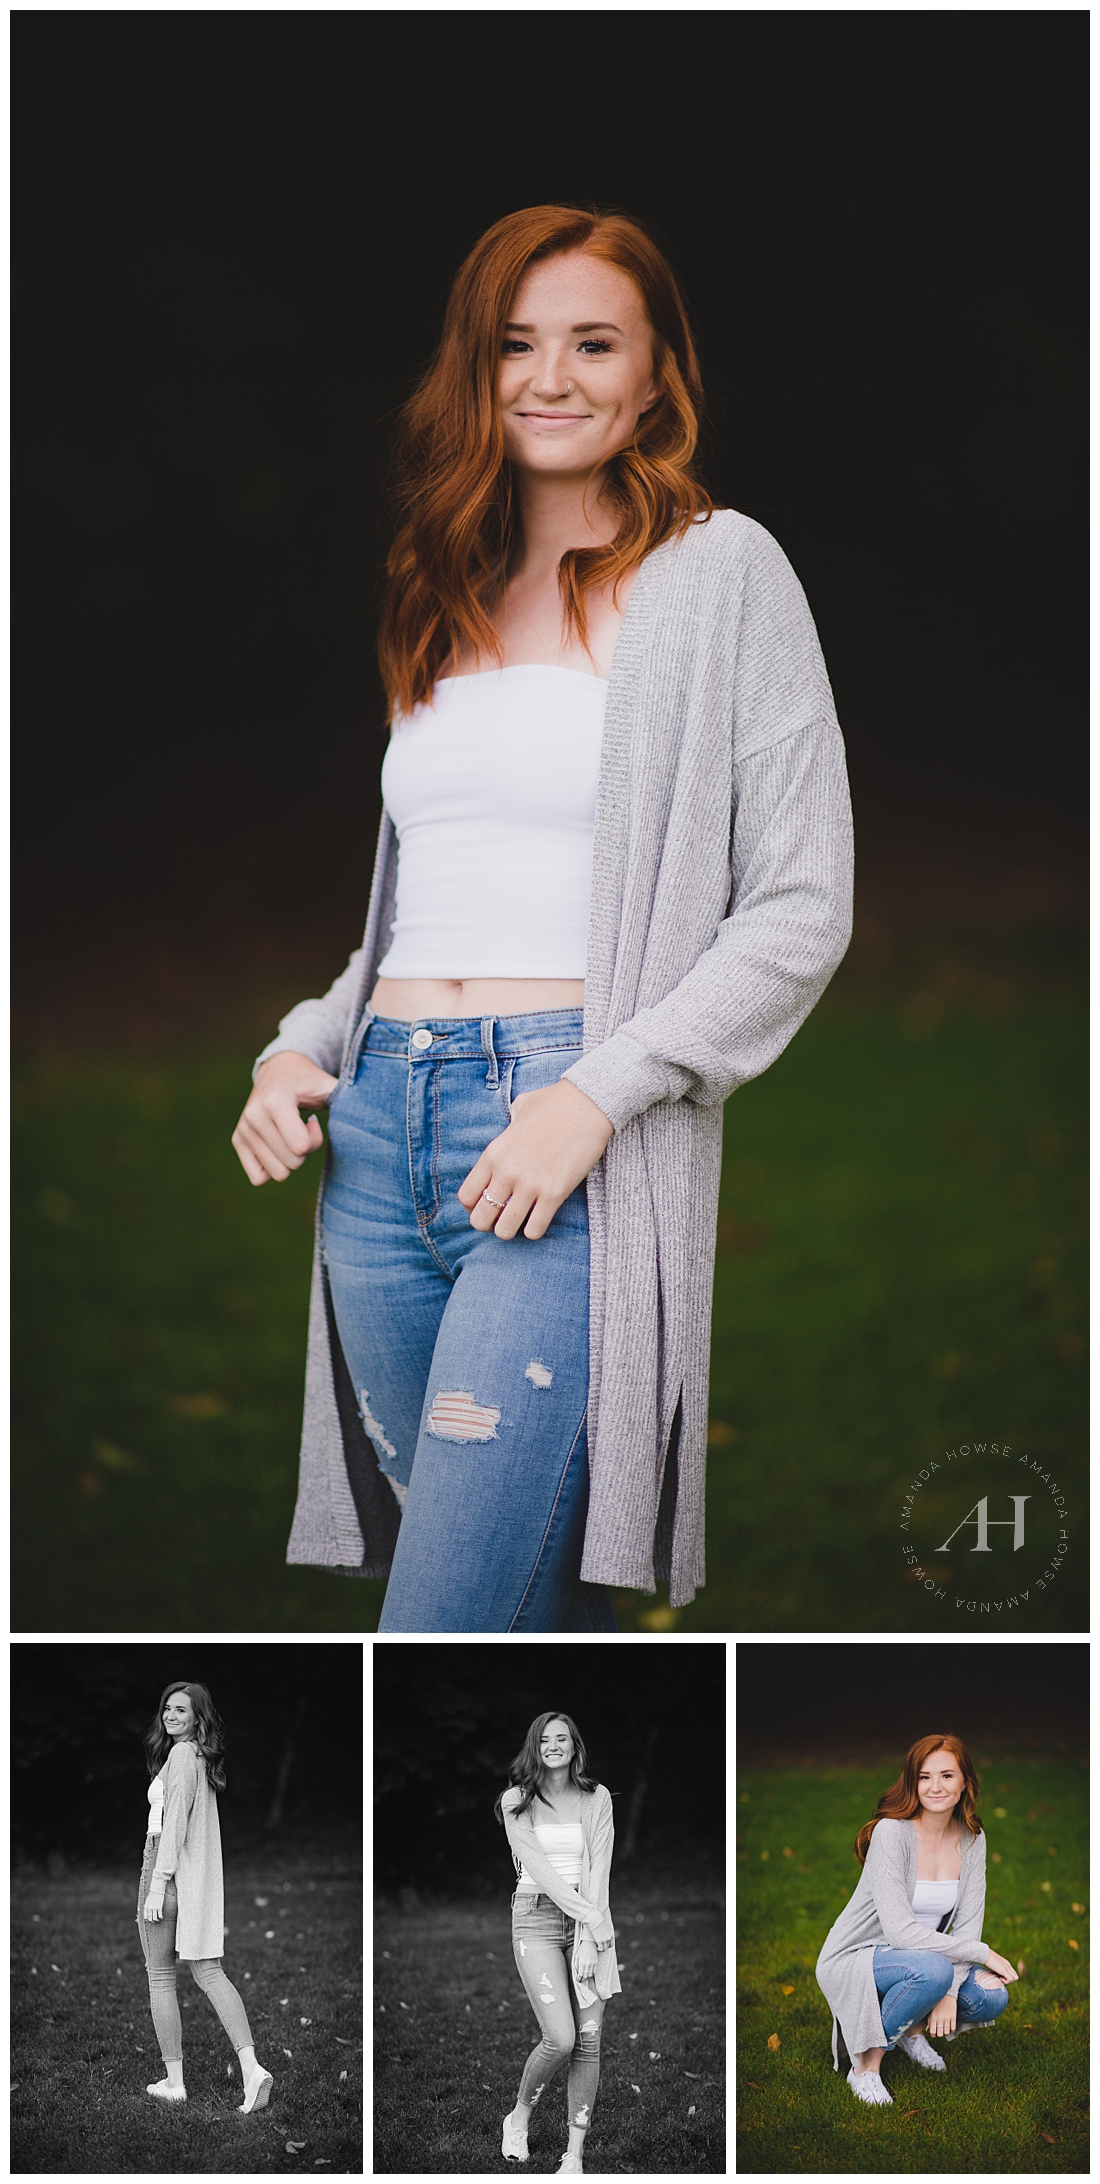 How to Wear Layers for Senior Portraits | Fall Senior Portrait Outfit Inspo, Pose Ideas for Senior Girls, Best Locations in Tacoma | Photographed by Senior Photographer Amanda Howse